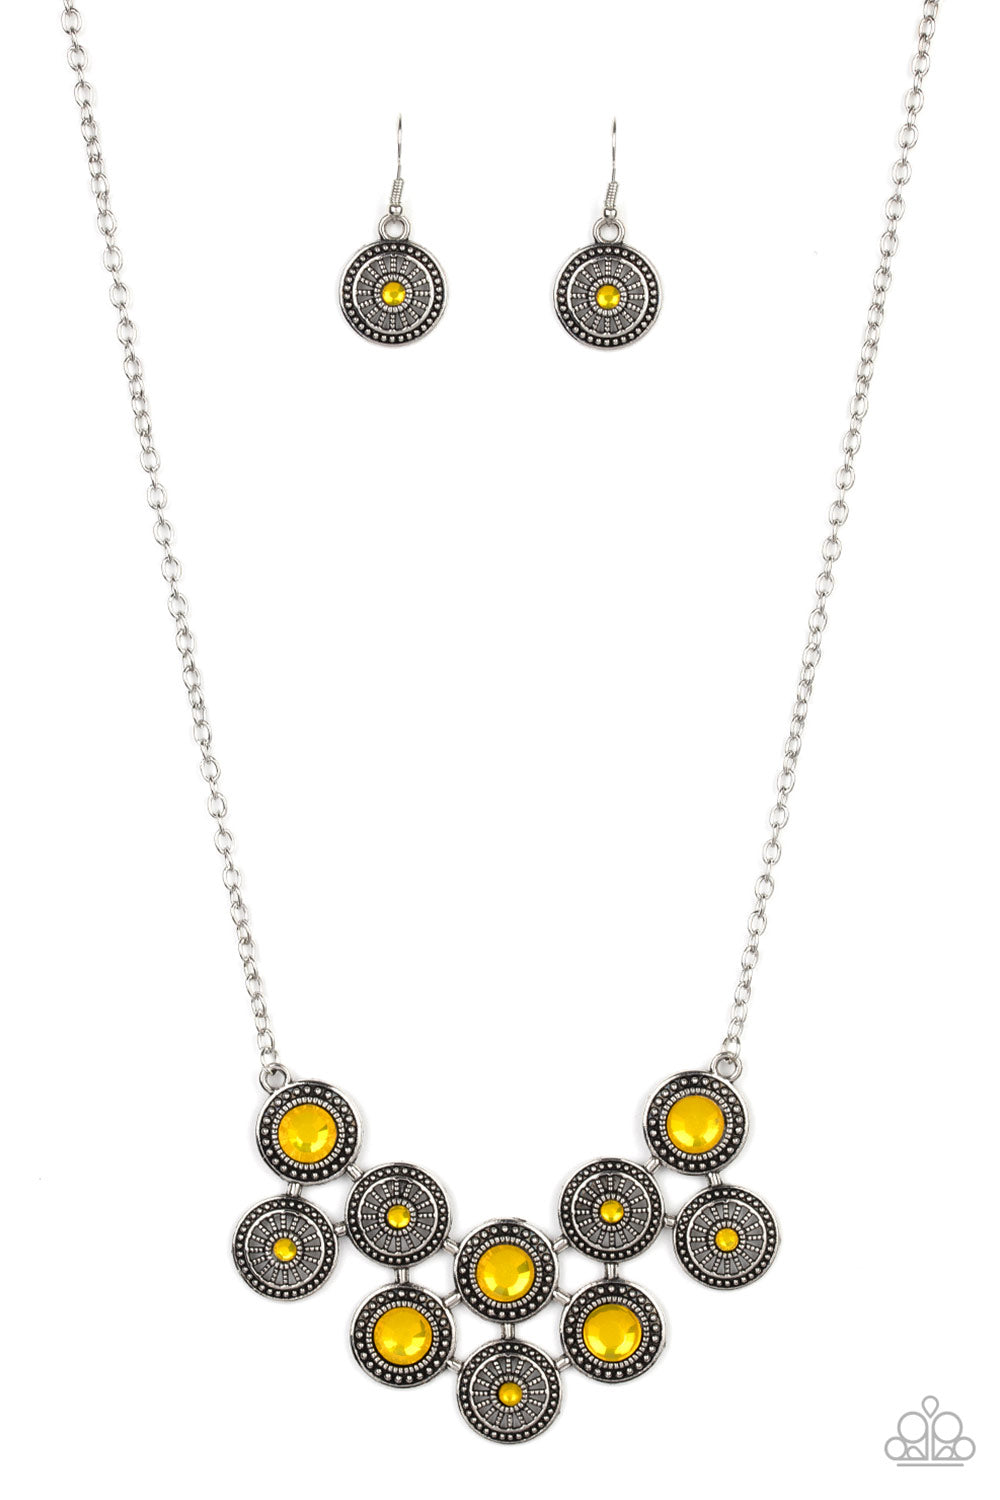 Whats Your Star Sign? - Yellow Necklace